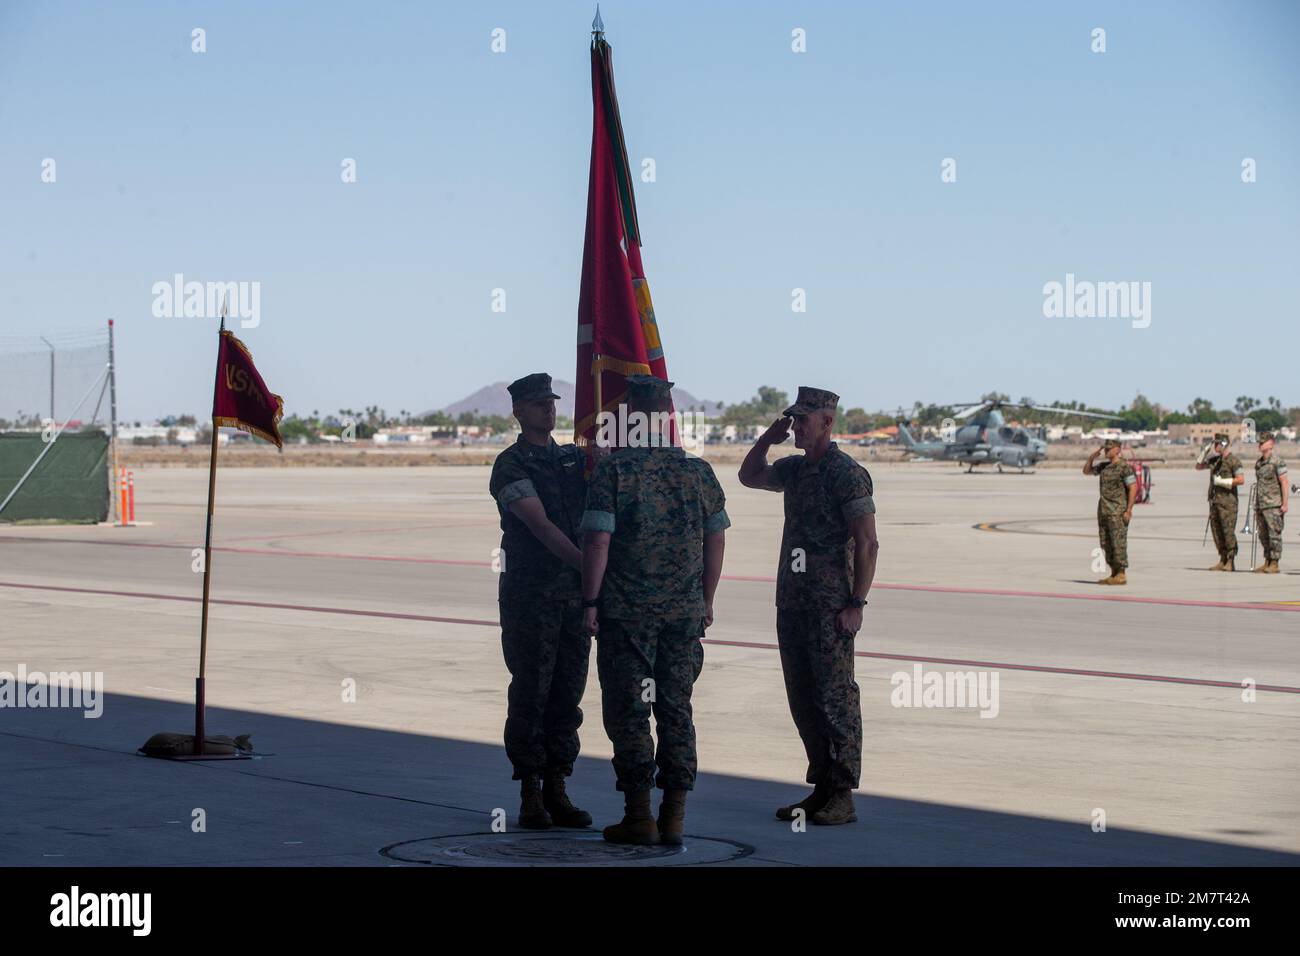 U.S. Marine Corps Col. Eric D. Purcell, left, incoming commanding officer of Marine Aviation Weapons and Tactics Squadron One (MAWTS-1), receives the unit colors from Col. Steve E. Gillette, outgoing commanding officer, during the MAWTS-1 Change of Command Ceremony at Marine Corps Air Station Yuma, Arizona on May 12, 2022. The MAWTS-1 Change of Command Ceremony marked the official passing of authority from the outgoing commanding officer, Col. Steve E. Gillette, to the incoming commanding officer, Col. Eric D. Purcell. Stock Photo